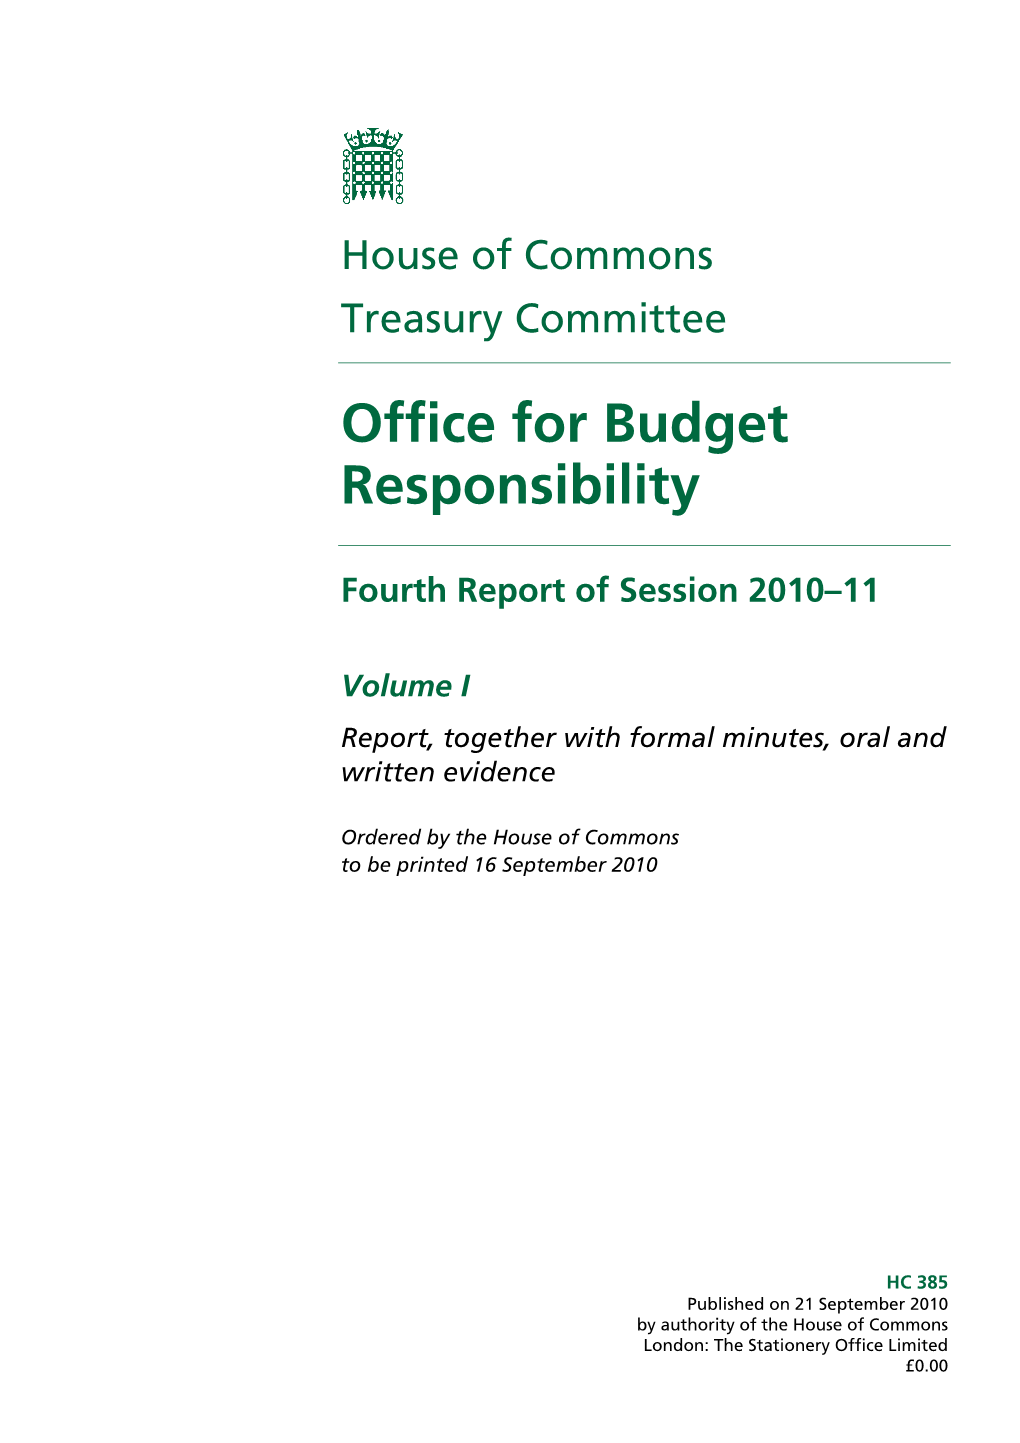 Office for Budget Responsibility